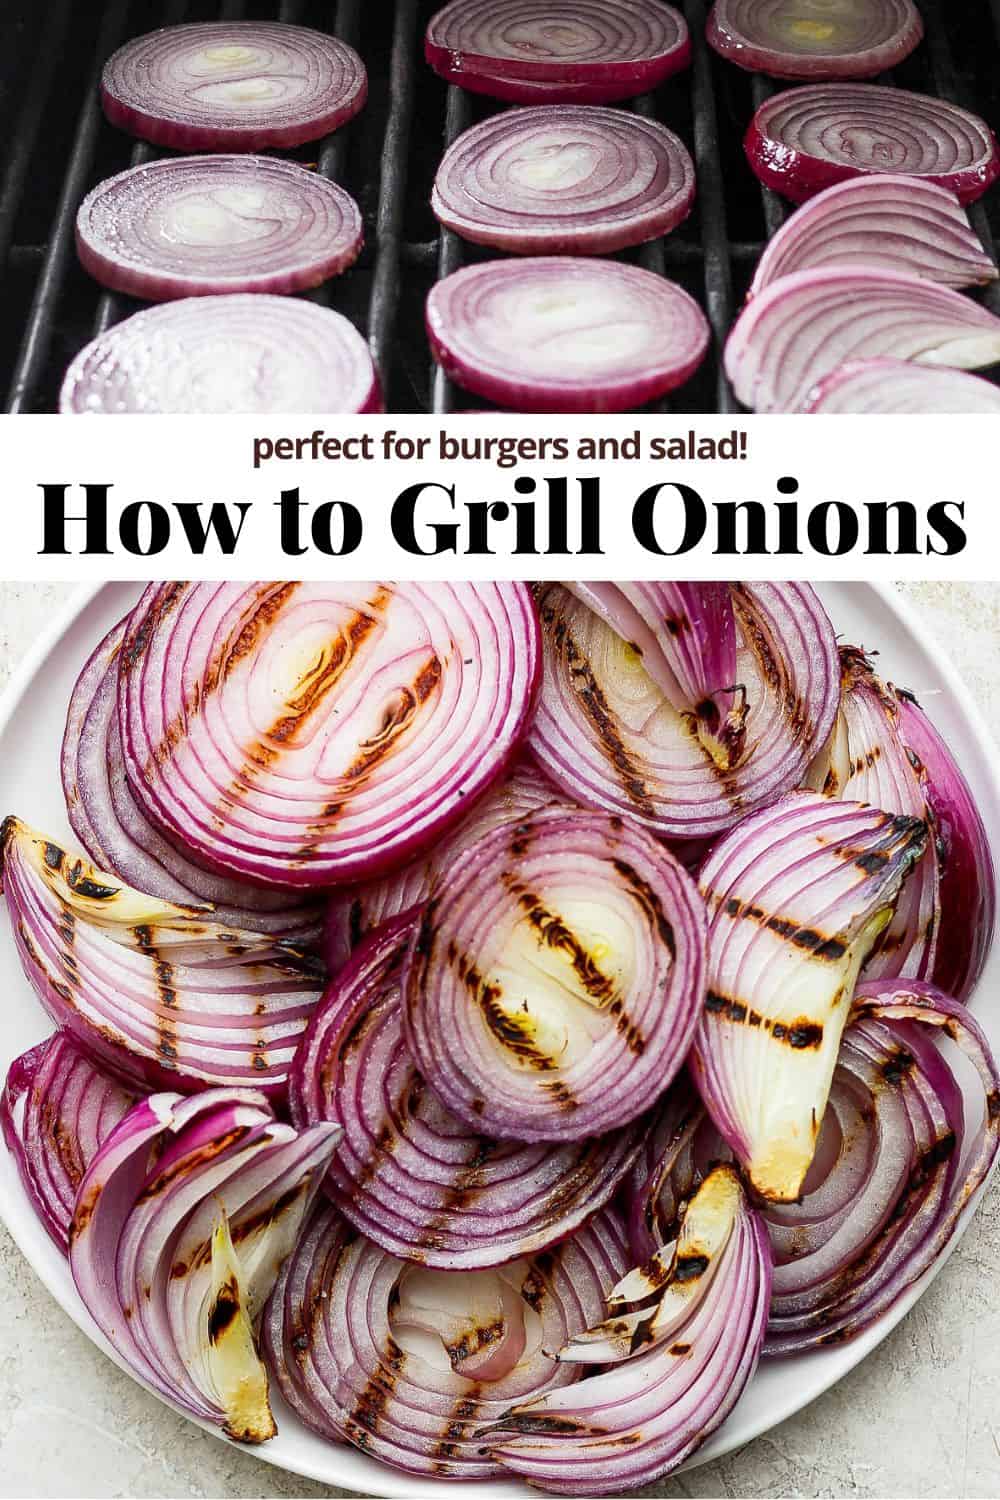 Pinterest image for how to grill onions.